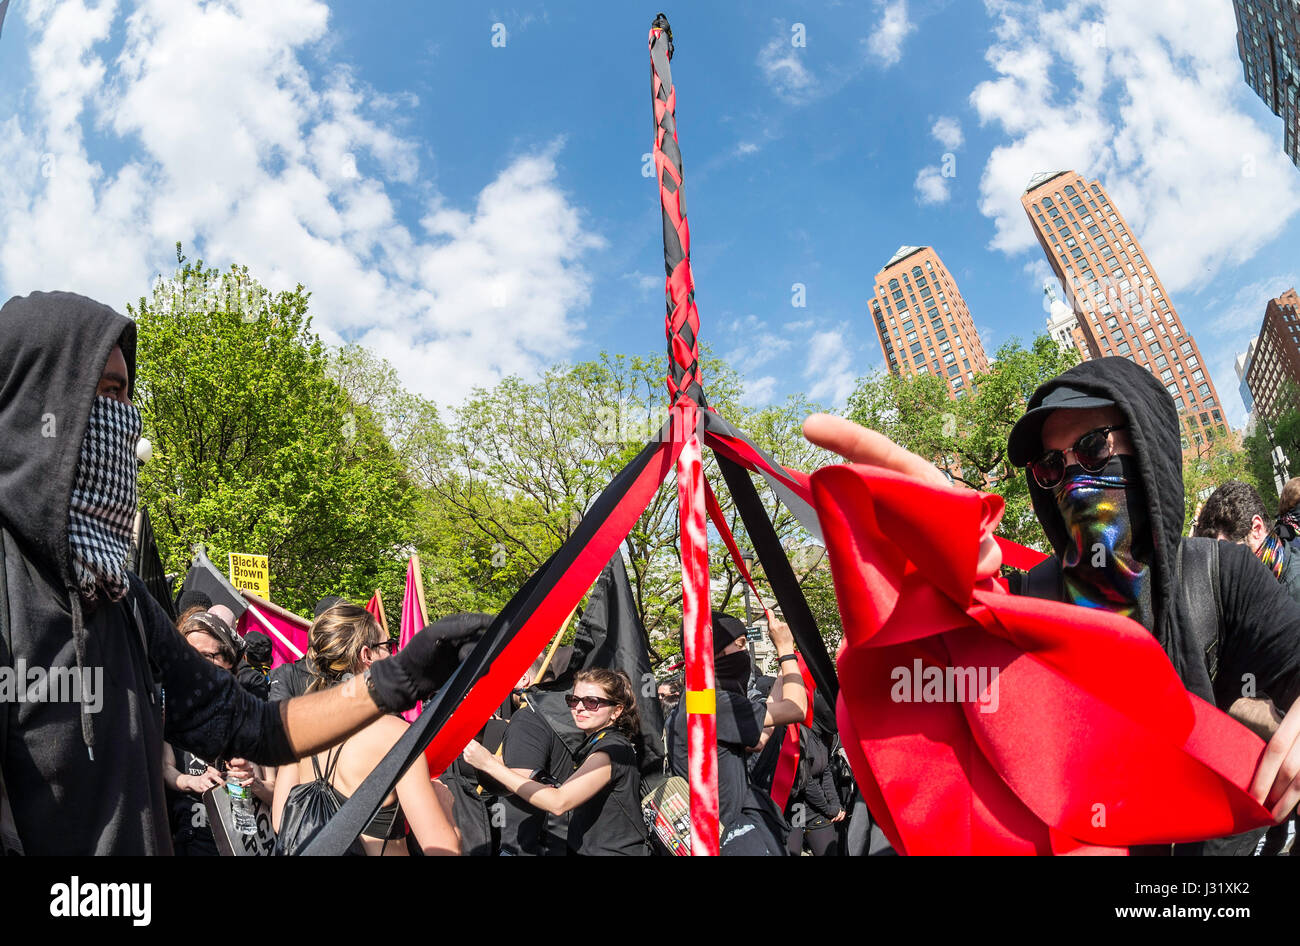 New York, USA. 01st May, 2017. New York, NY 1 May 2017 - Anarchists dance around a Maypole at a May Day/International Workers Day rally in Union Square Park. Credit: Stacy Walsh Rosenstock/Alamy Live News Stock Photo